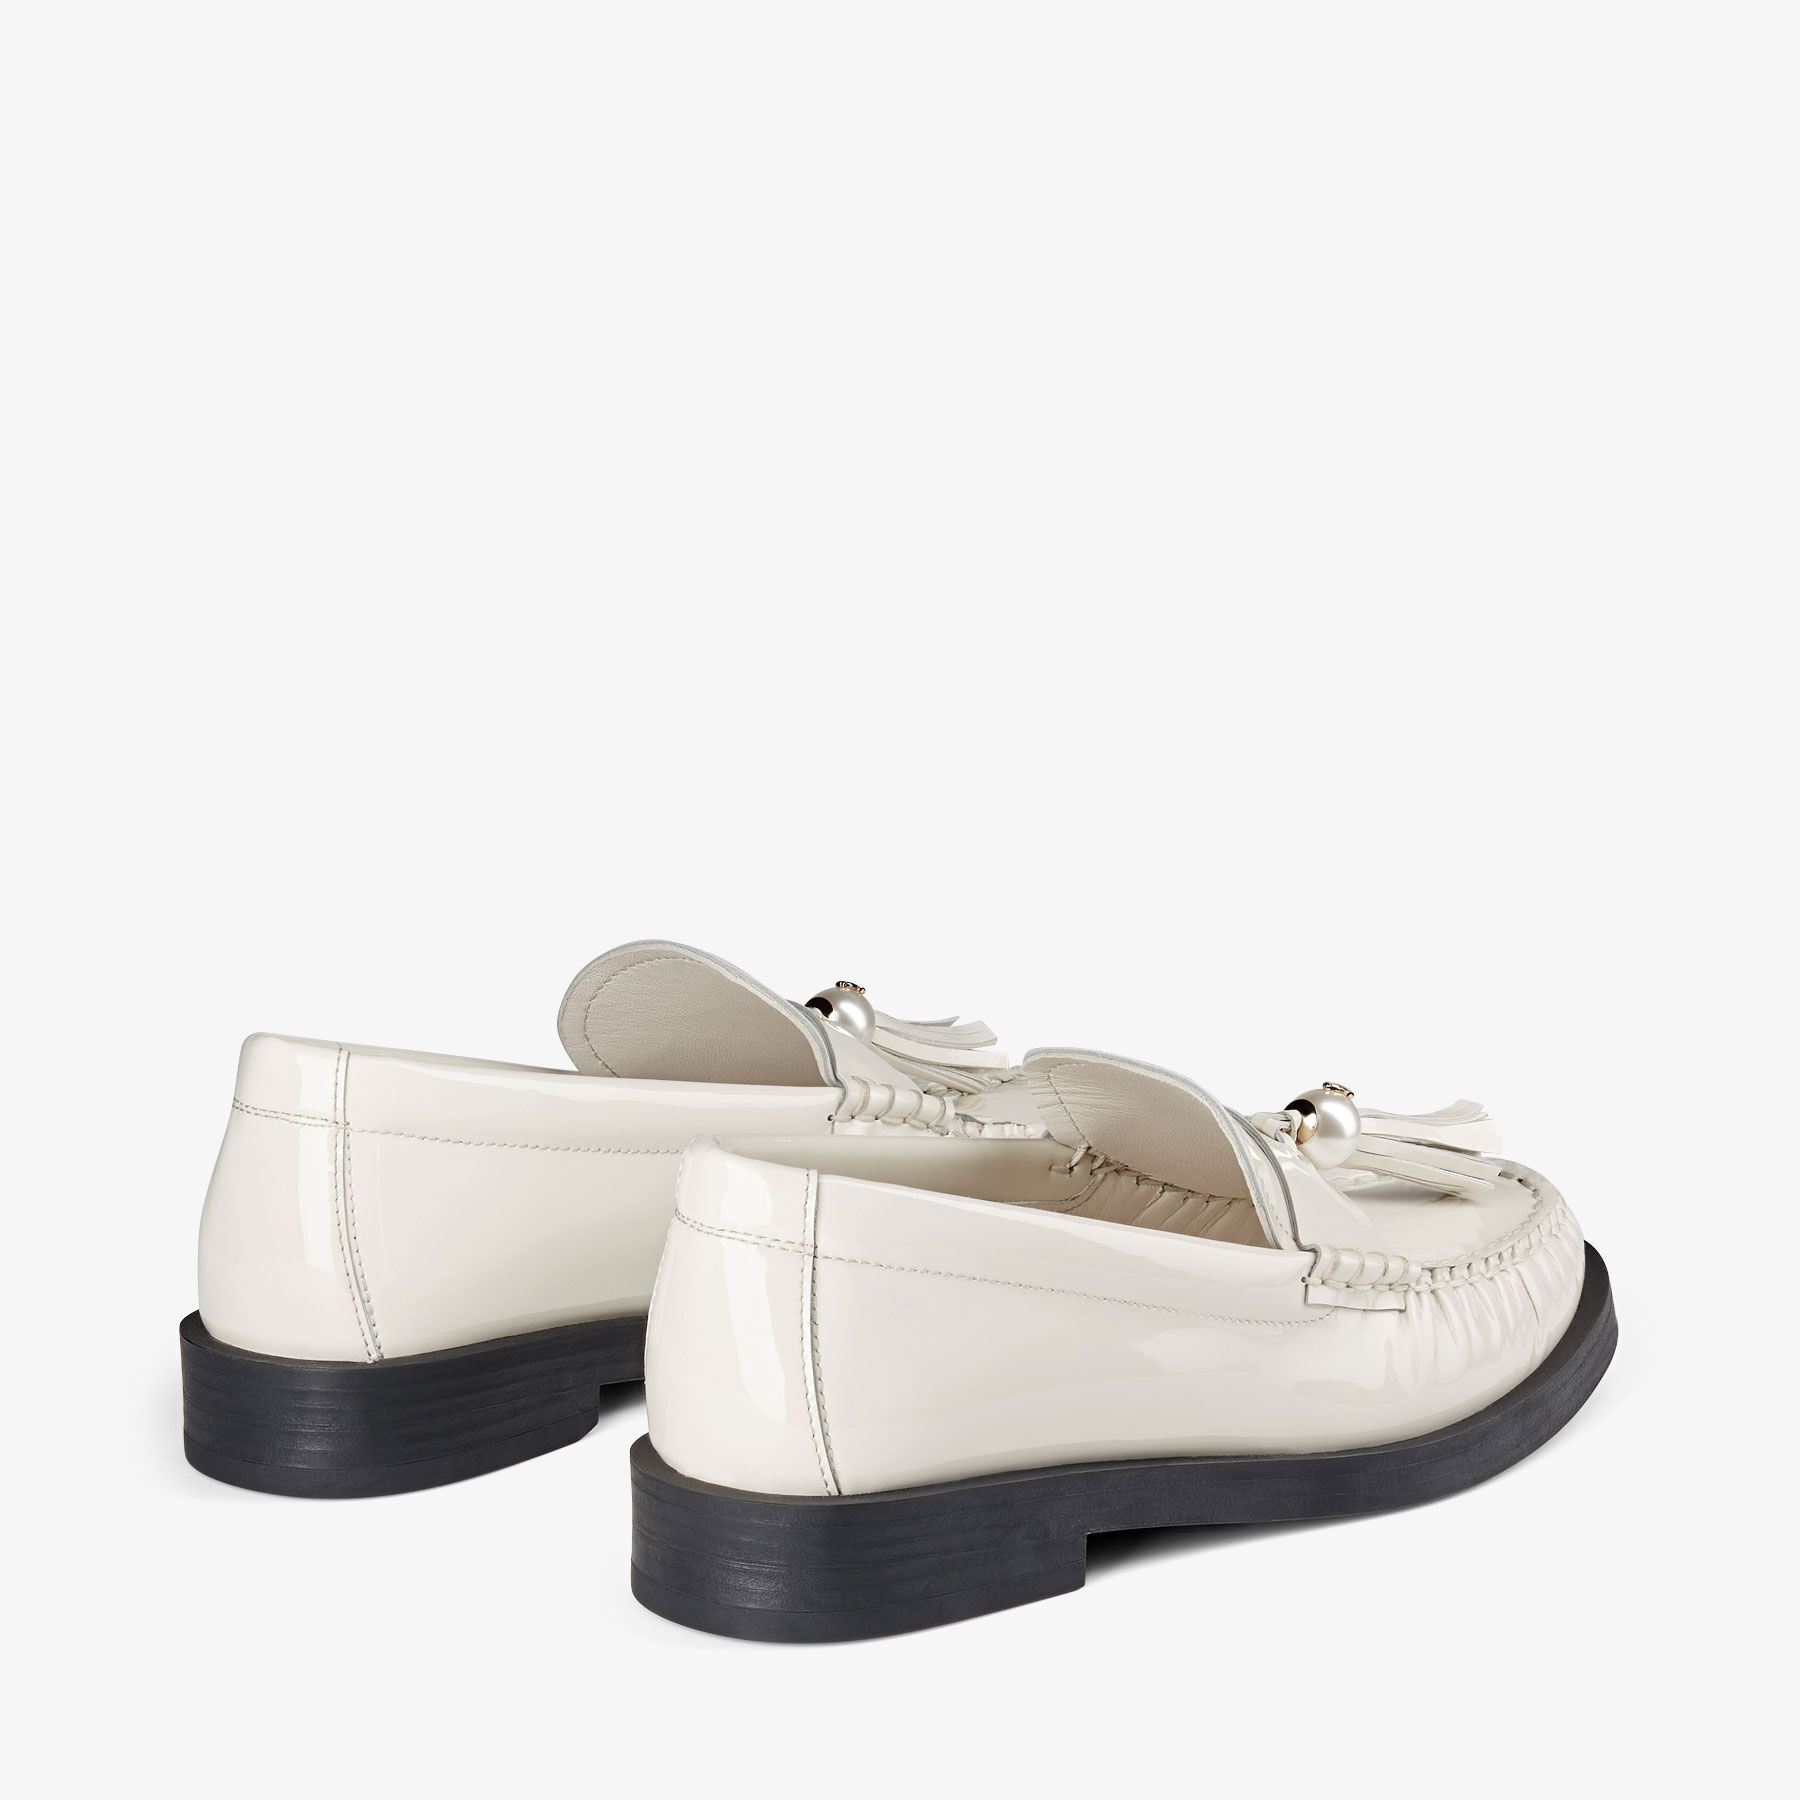 Addie/Pearl | Latte Patent Leather Flat Loafers with Pearl Tassel 